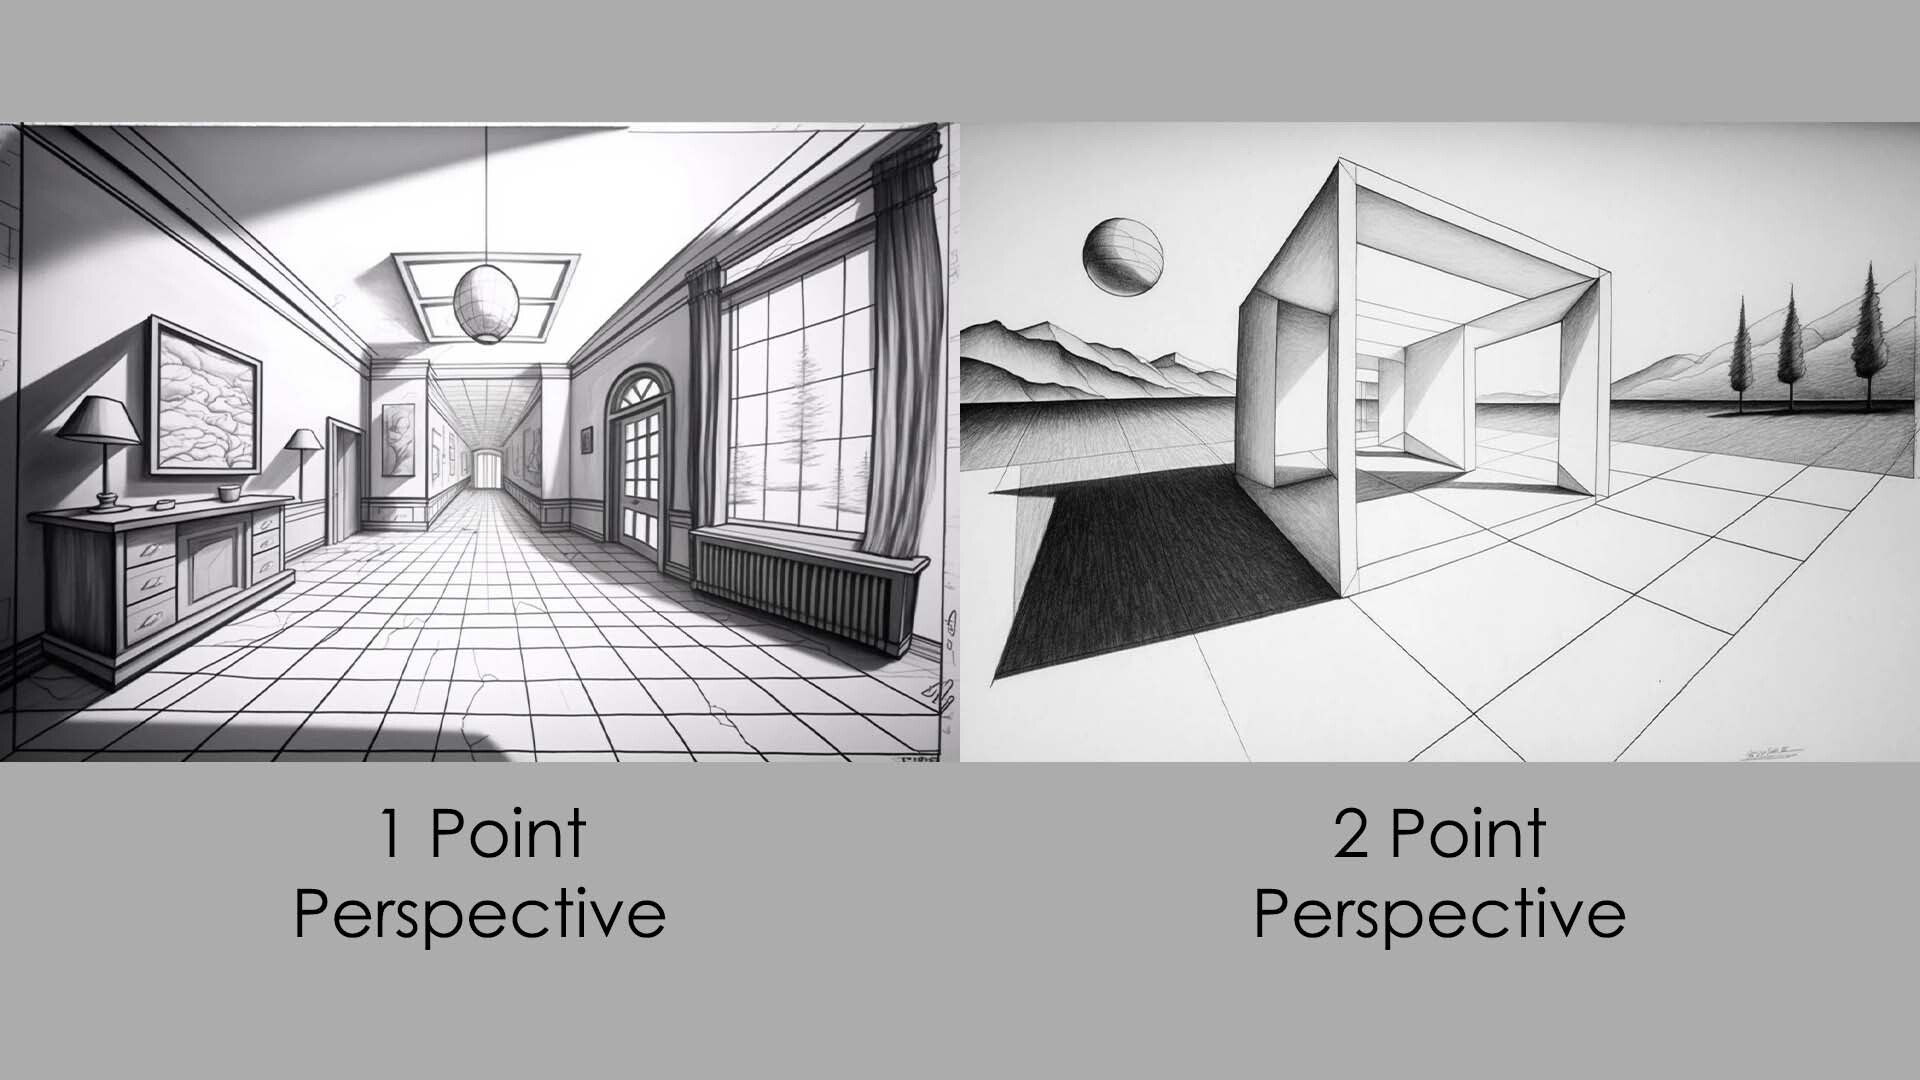 ArtStation - Beyond the Basics: Advanced Techniques in Perspective